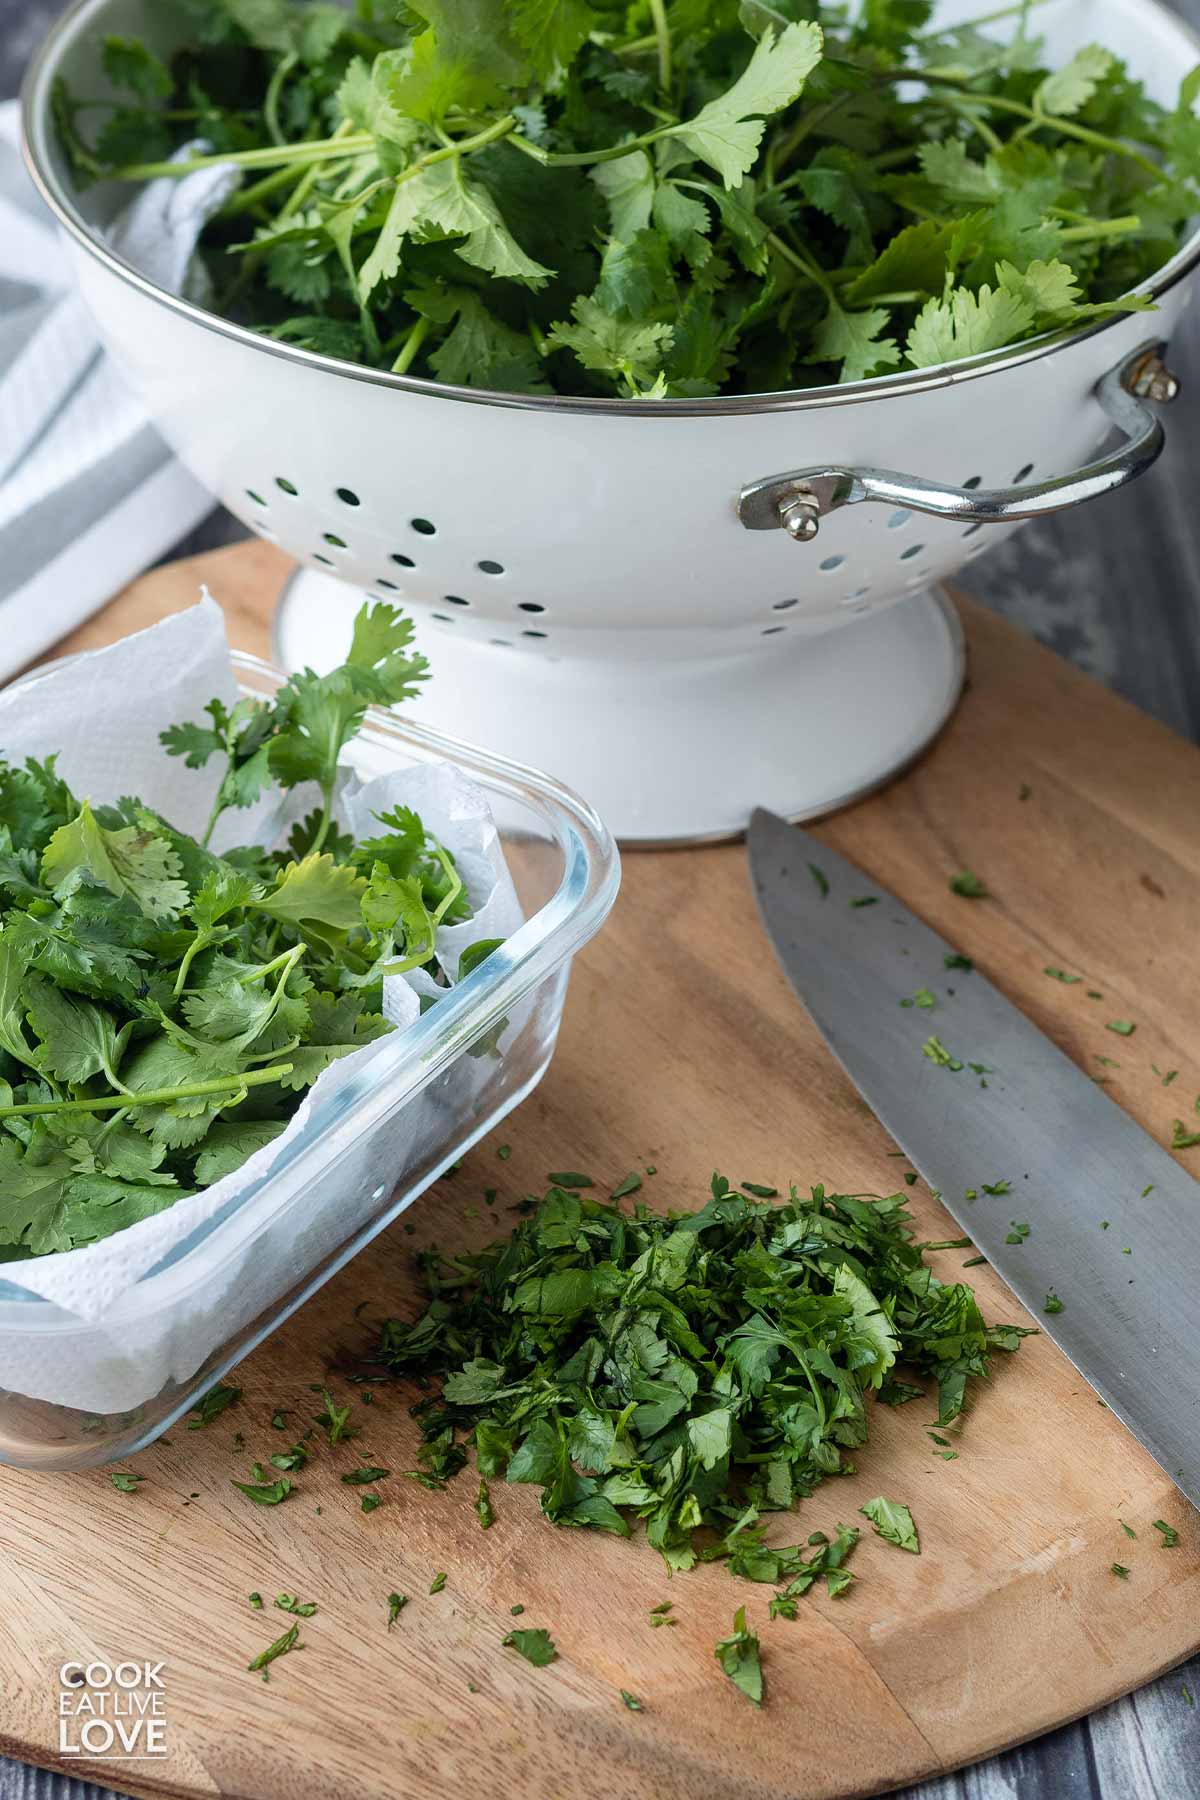 Chopped cilantro leaves next to a container and colander of cilantro on the cutting board.